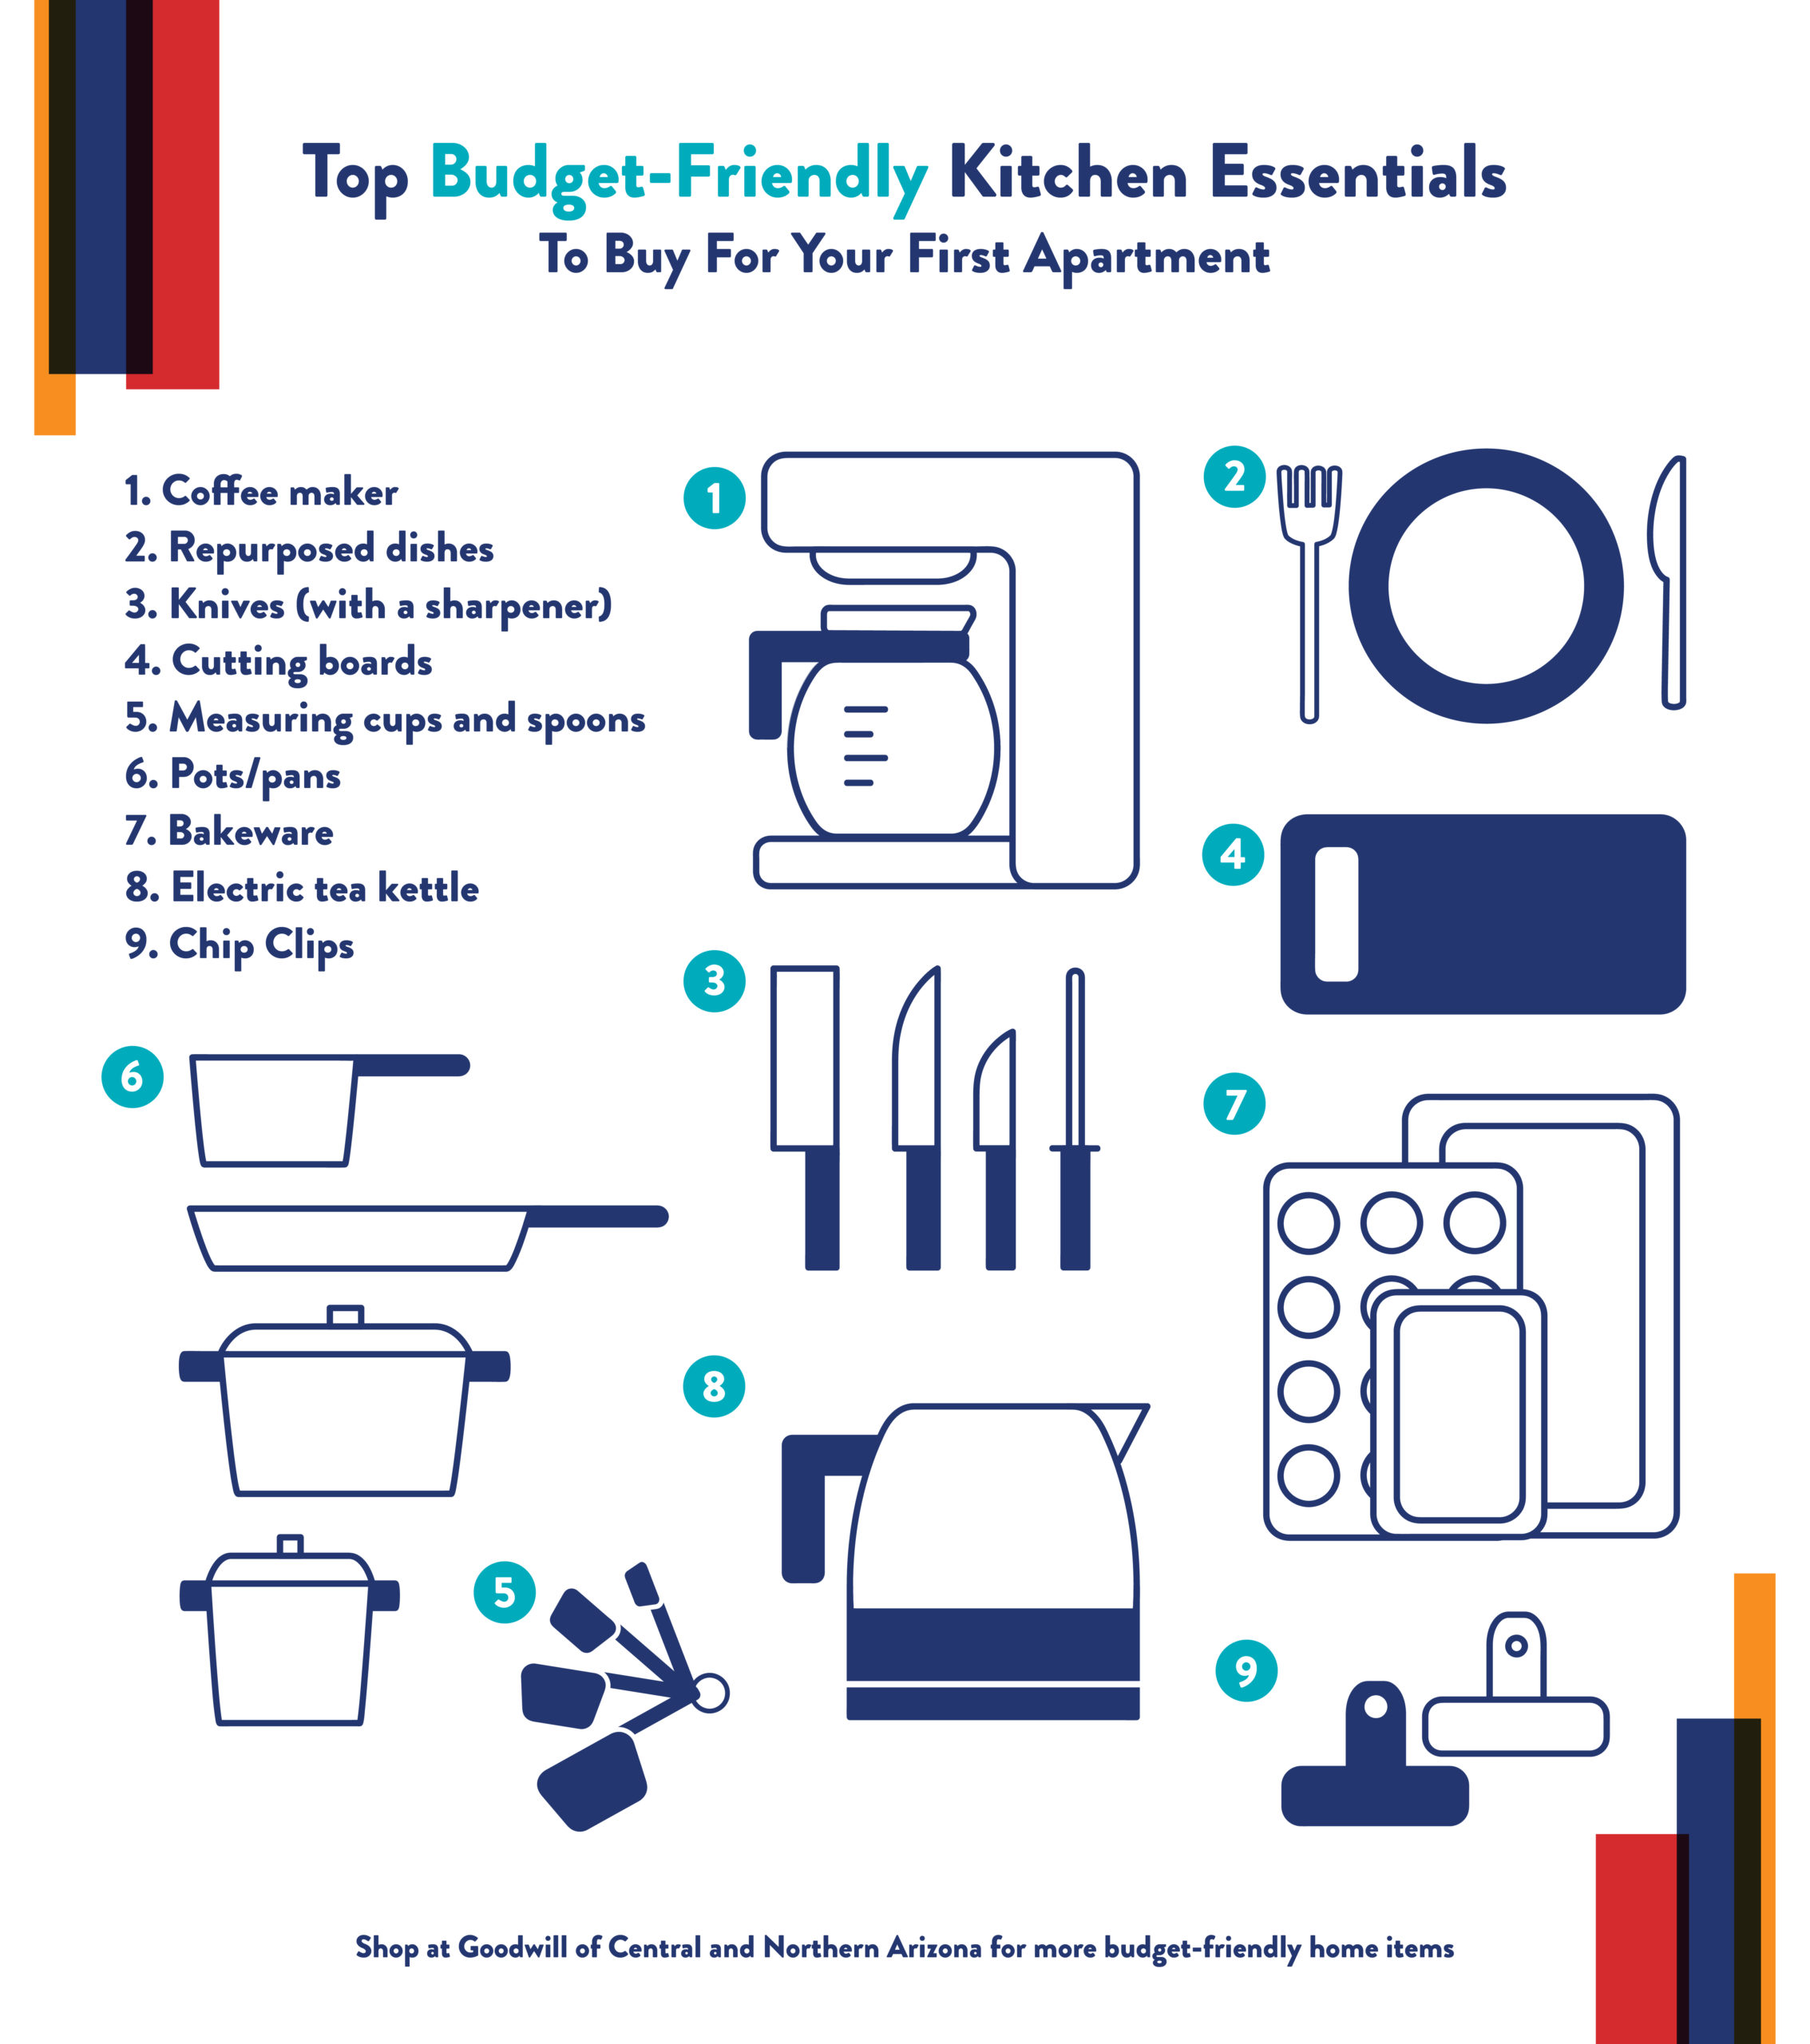 Apartment Essentials for First Apartment Must Haves, Funny Kitchen Gadgets